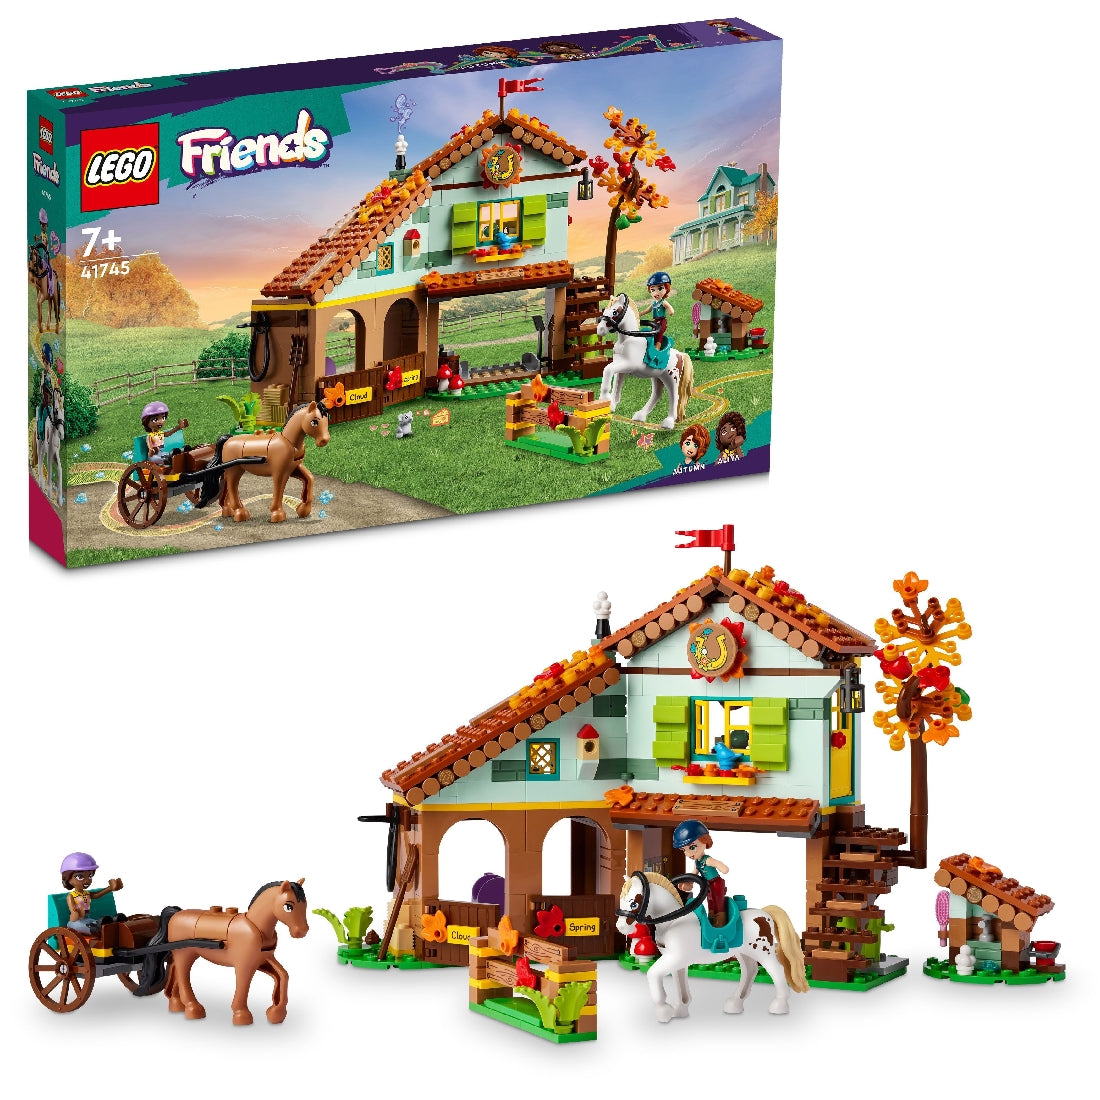 LEGO FRIENDS AUTUMN’S HORSE STABLE 41745 AGE: 7+